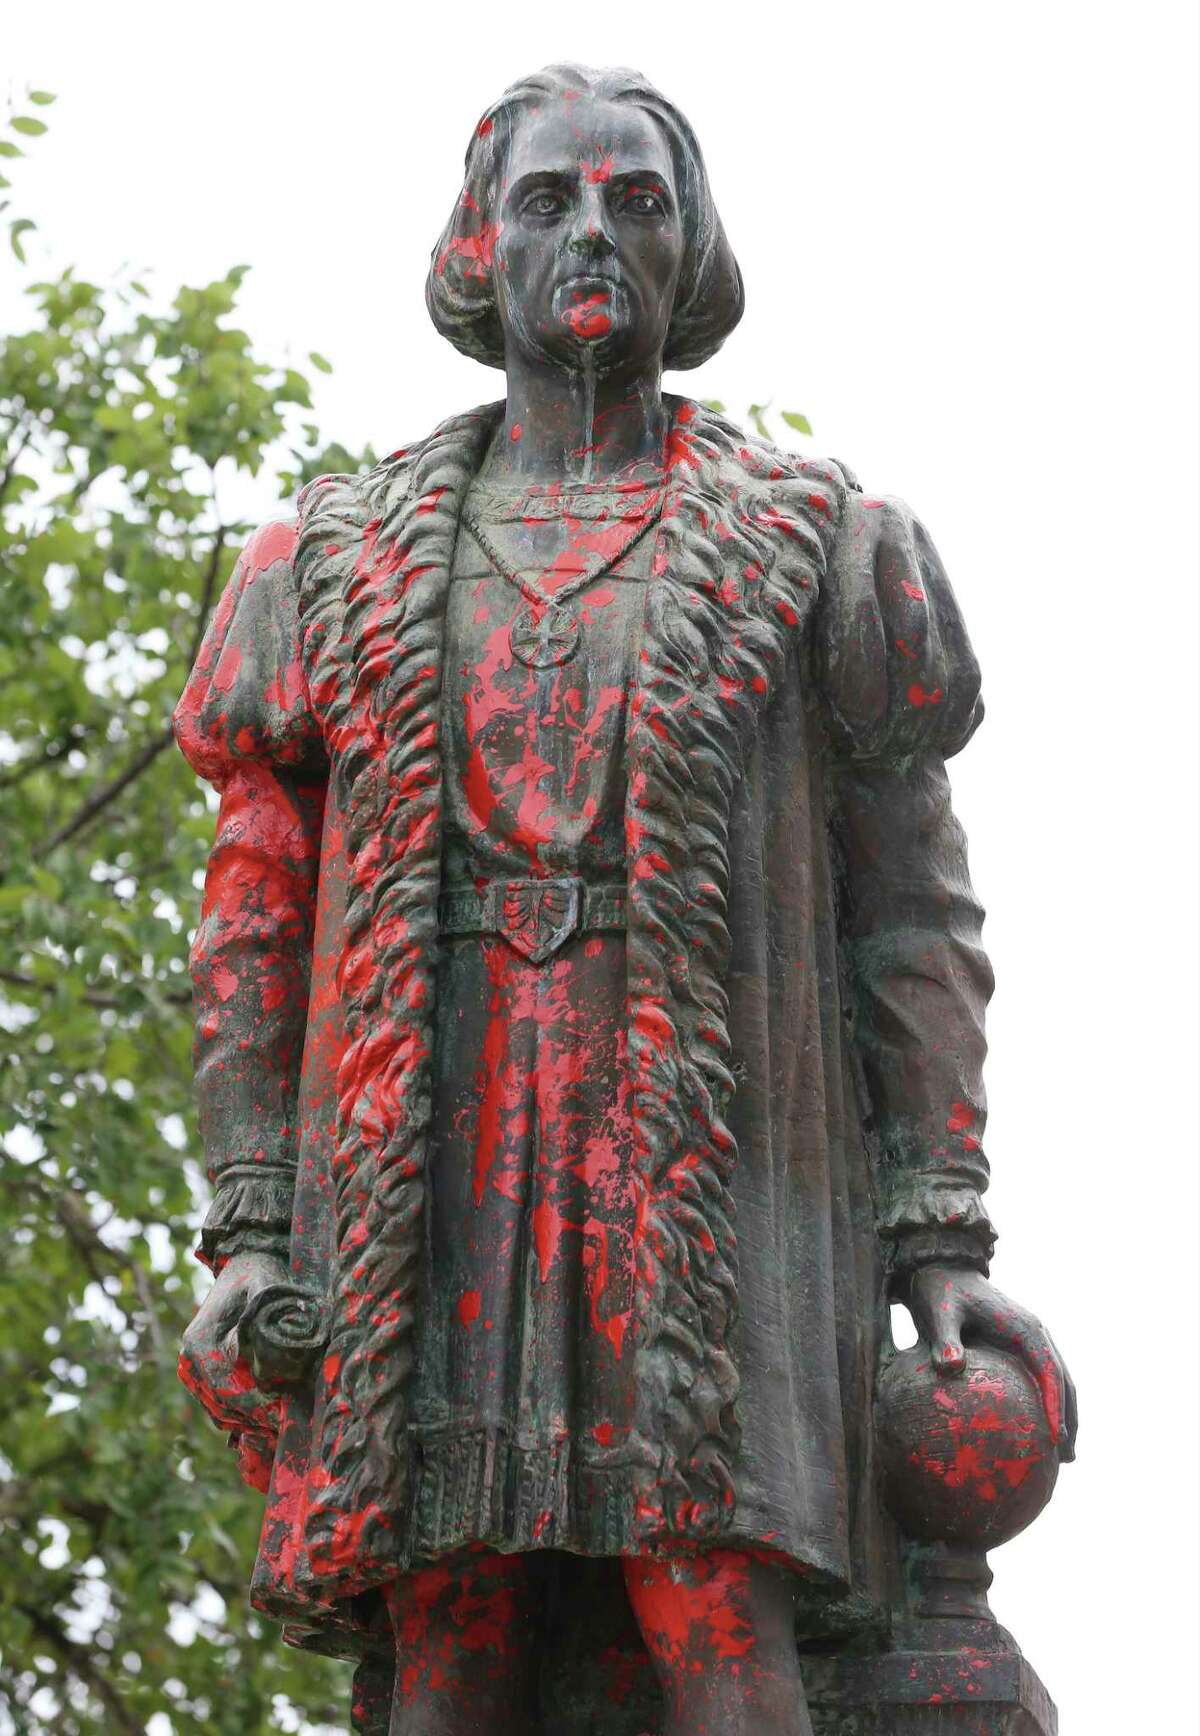 The Christopher Columbus statue located in the Piazza Di Columbo or also called Columbus Park located off Martin Street in downtown was vandalized with red paint on Thursday, June 25, 2020. In the weeks following protests calling for police reform after the death of African-American George Floyd, activists have also made a call to remove statues most notably of Civil War Confederate figures. But some have also called for statues like the Columbus statue to also be removed. The statue that was vandalized had been brought up for consideration for removal by District 1 Councilman Robert Trevino. The statue was donated by the Christopher Columbus Society in 1957. The name of the park is also under consideration to be renamed.